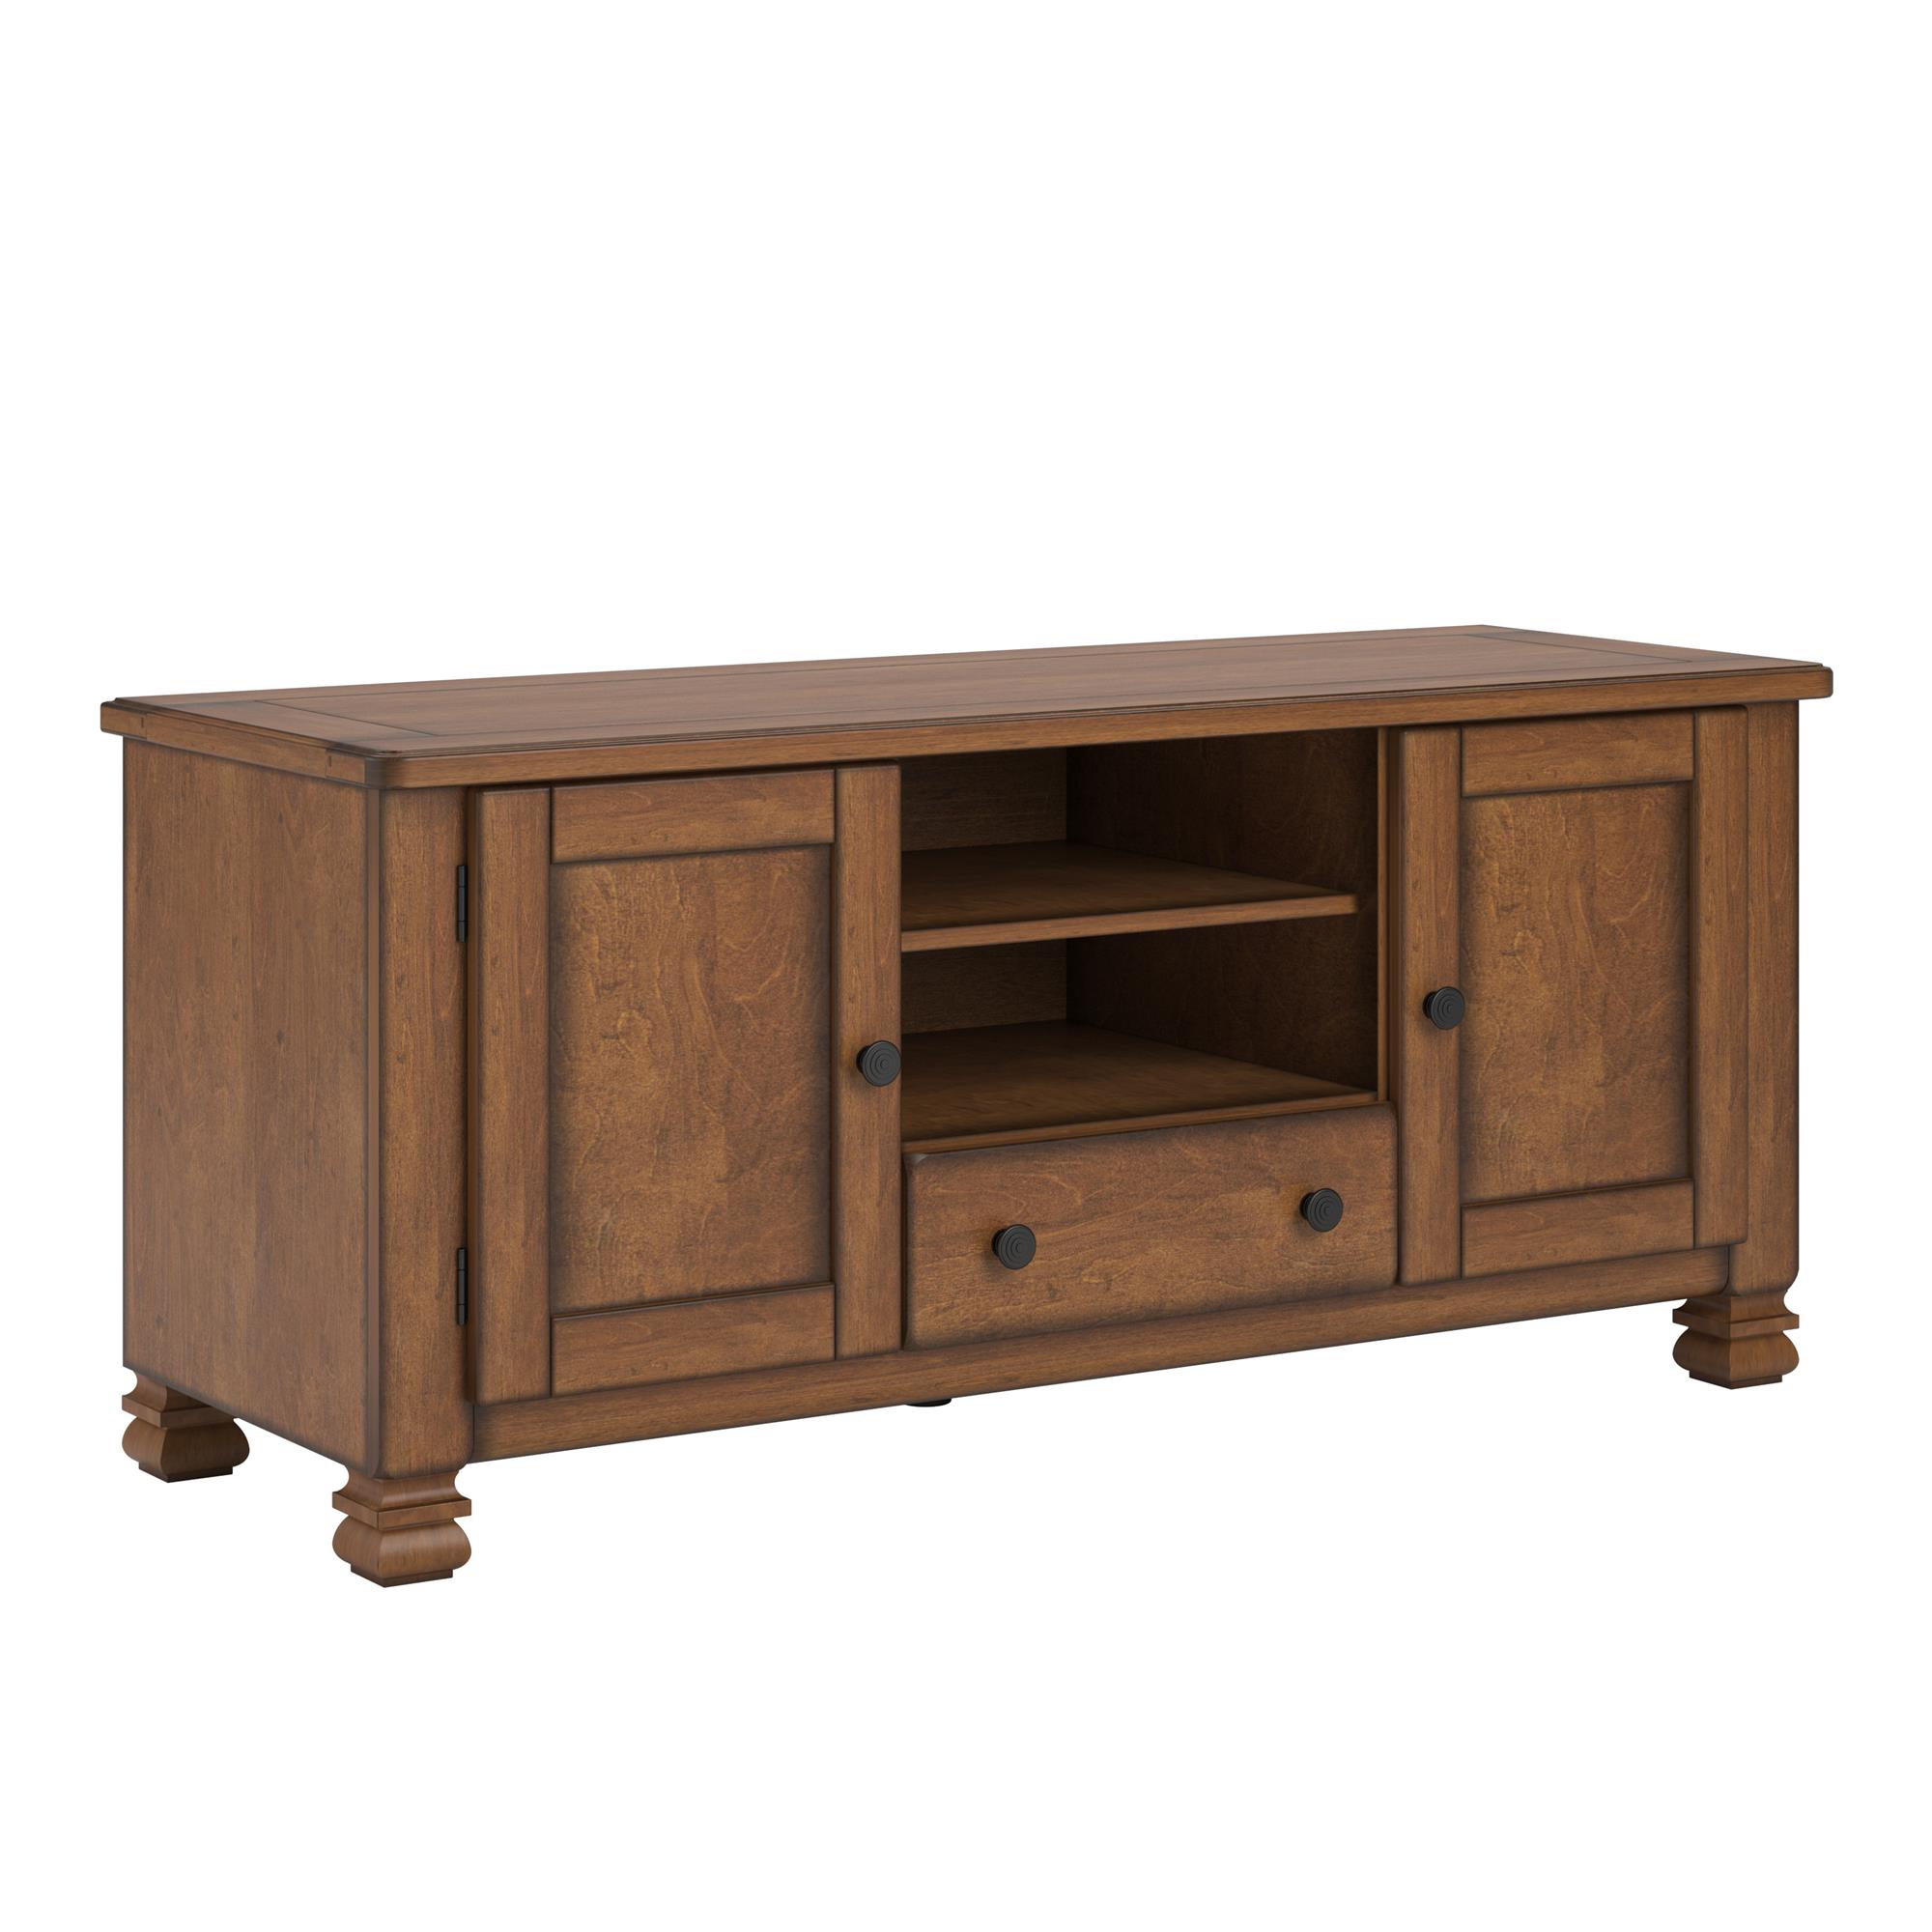 Ameriwood Home Summit Mountain Wood Veneer TV Stand for TVs up to 55" Wide, Medium Brown - image 2 of 9